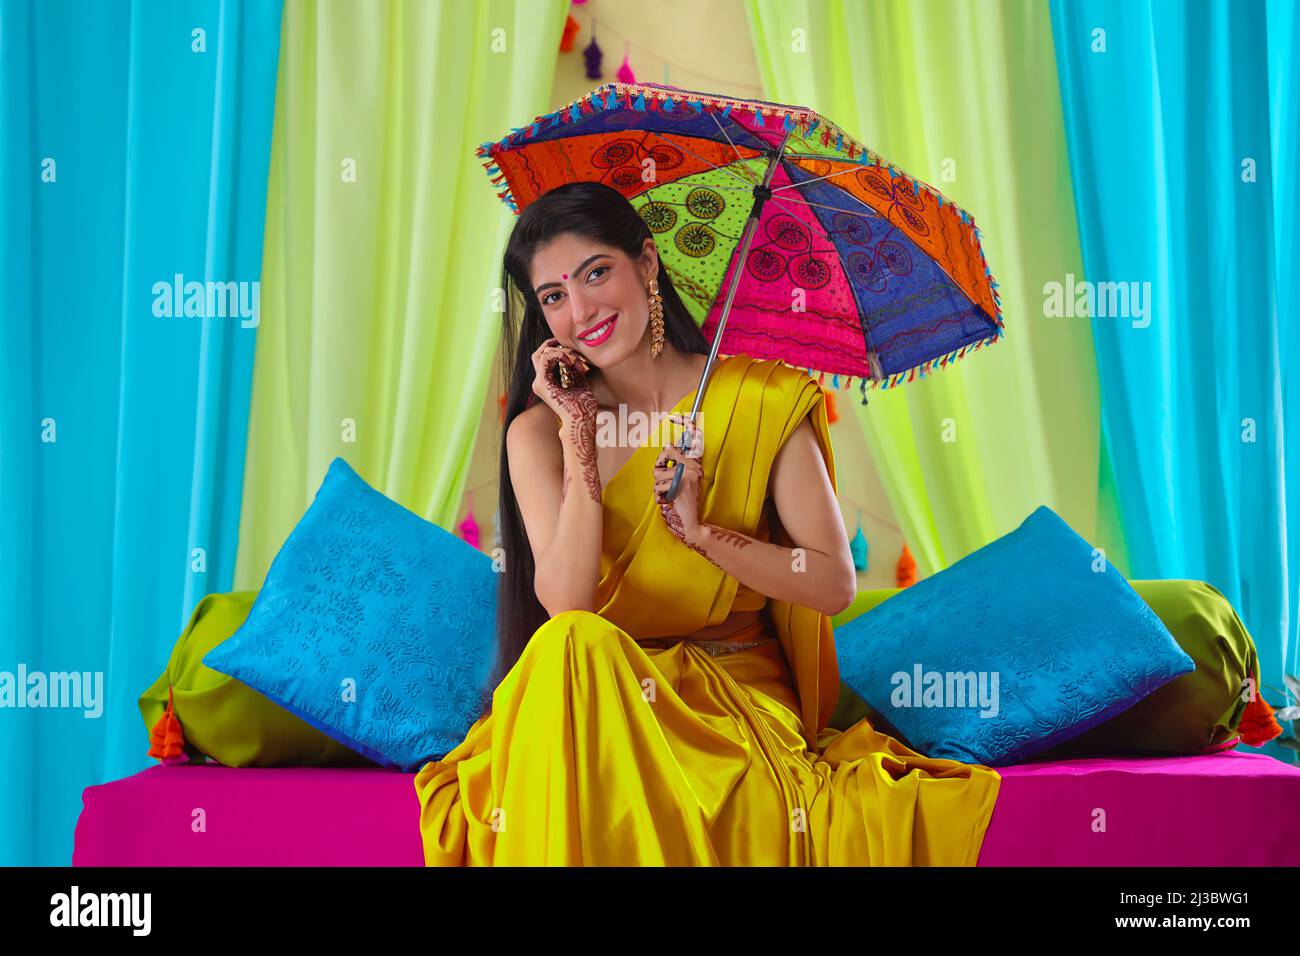 Indian bride in yellow saree looking at camera while sitting on stage with holding an umbrella over head Stock Photo